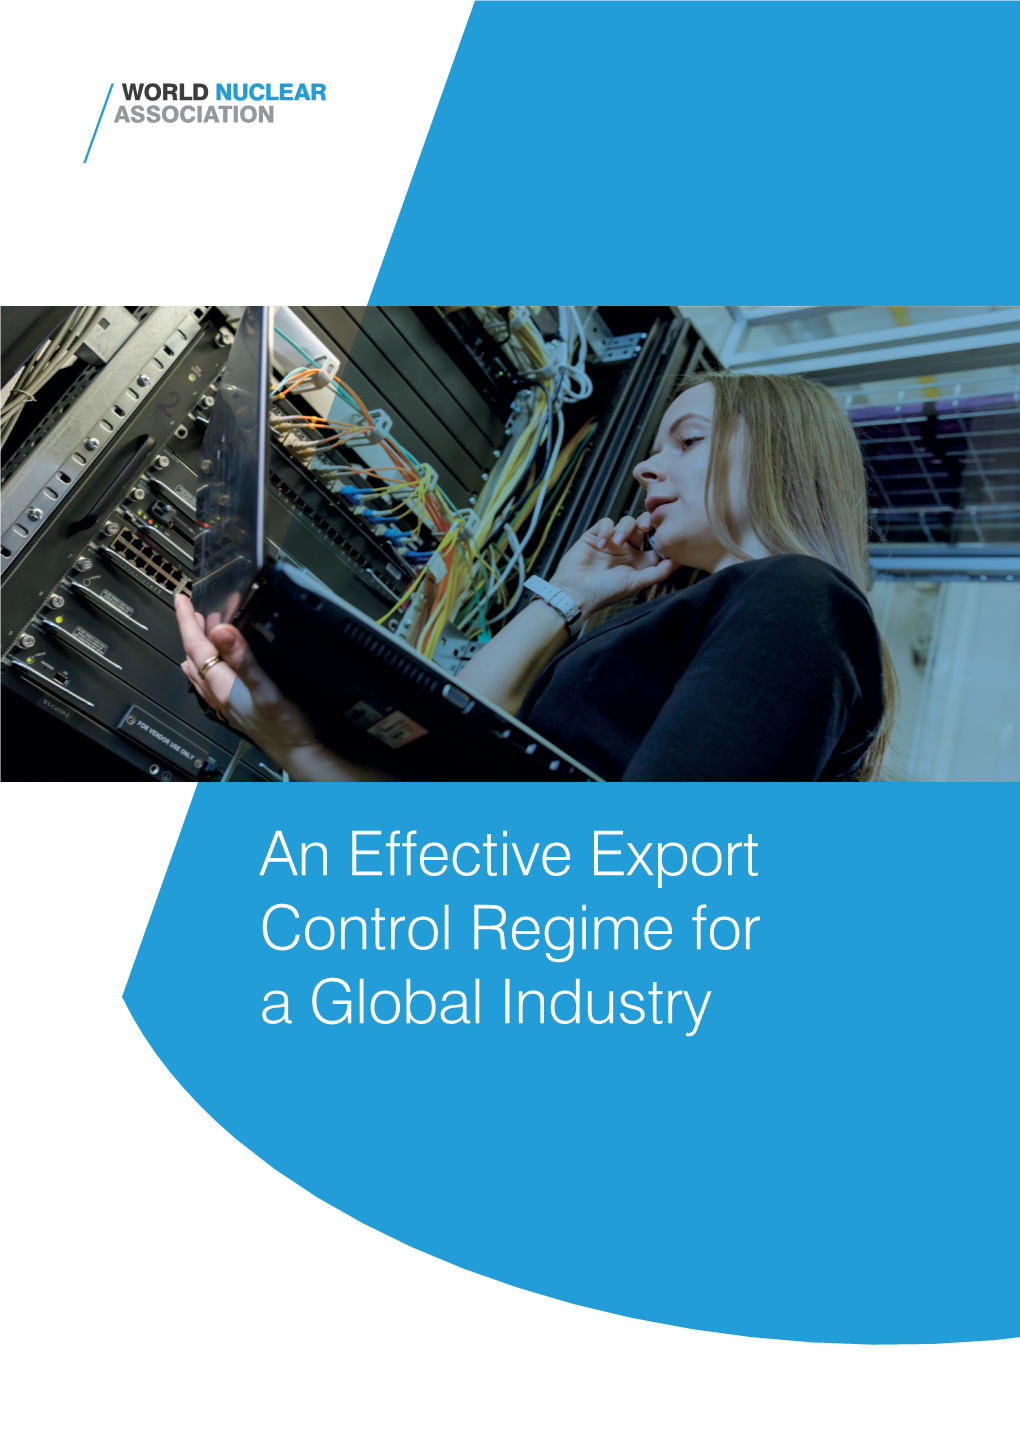 An Effective Export Control Regime for a Global Industry